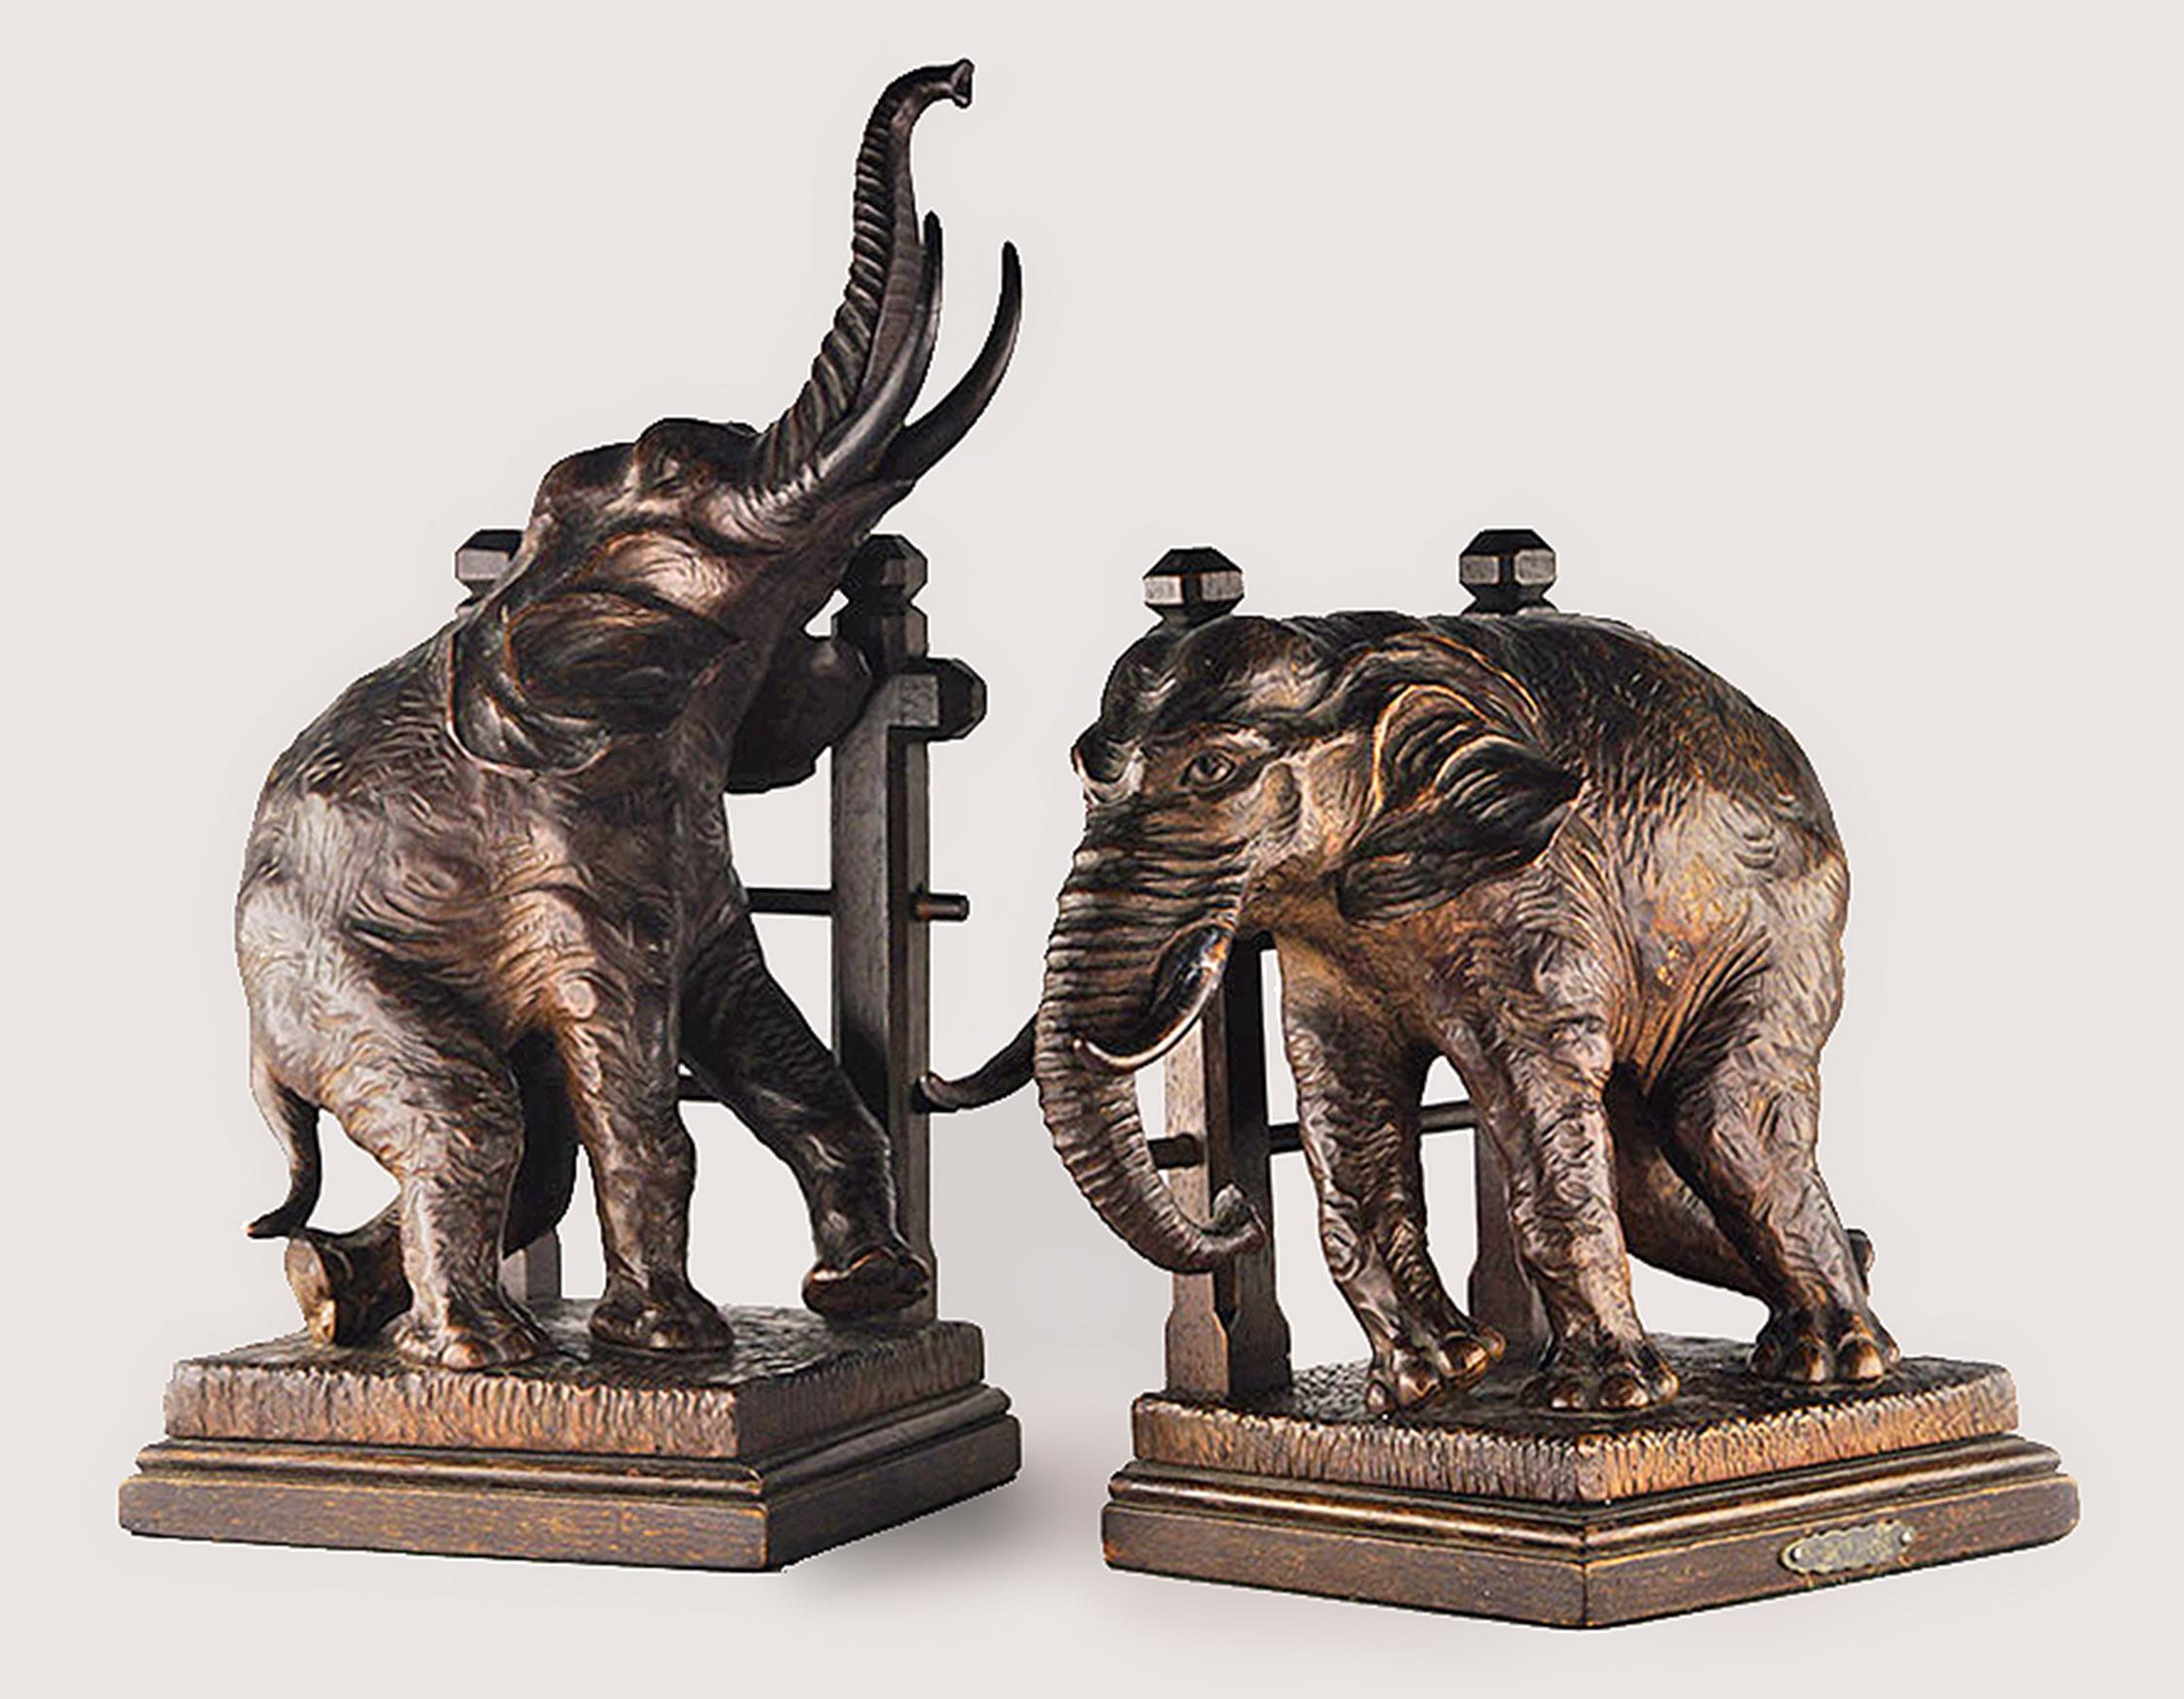 Pair of early 20th century carved hand-crafted wooden elephant bookends by french sculptor Ary Bitter

By: Ary Bitter
Material: wood, metal
Technique: hand-crafted, hand-carved, carved, metalwork
Dimensions: 6 in x 5.5 in x 12 in
Date: early 20th